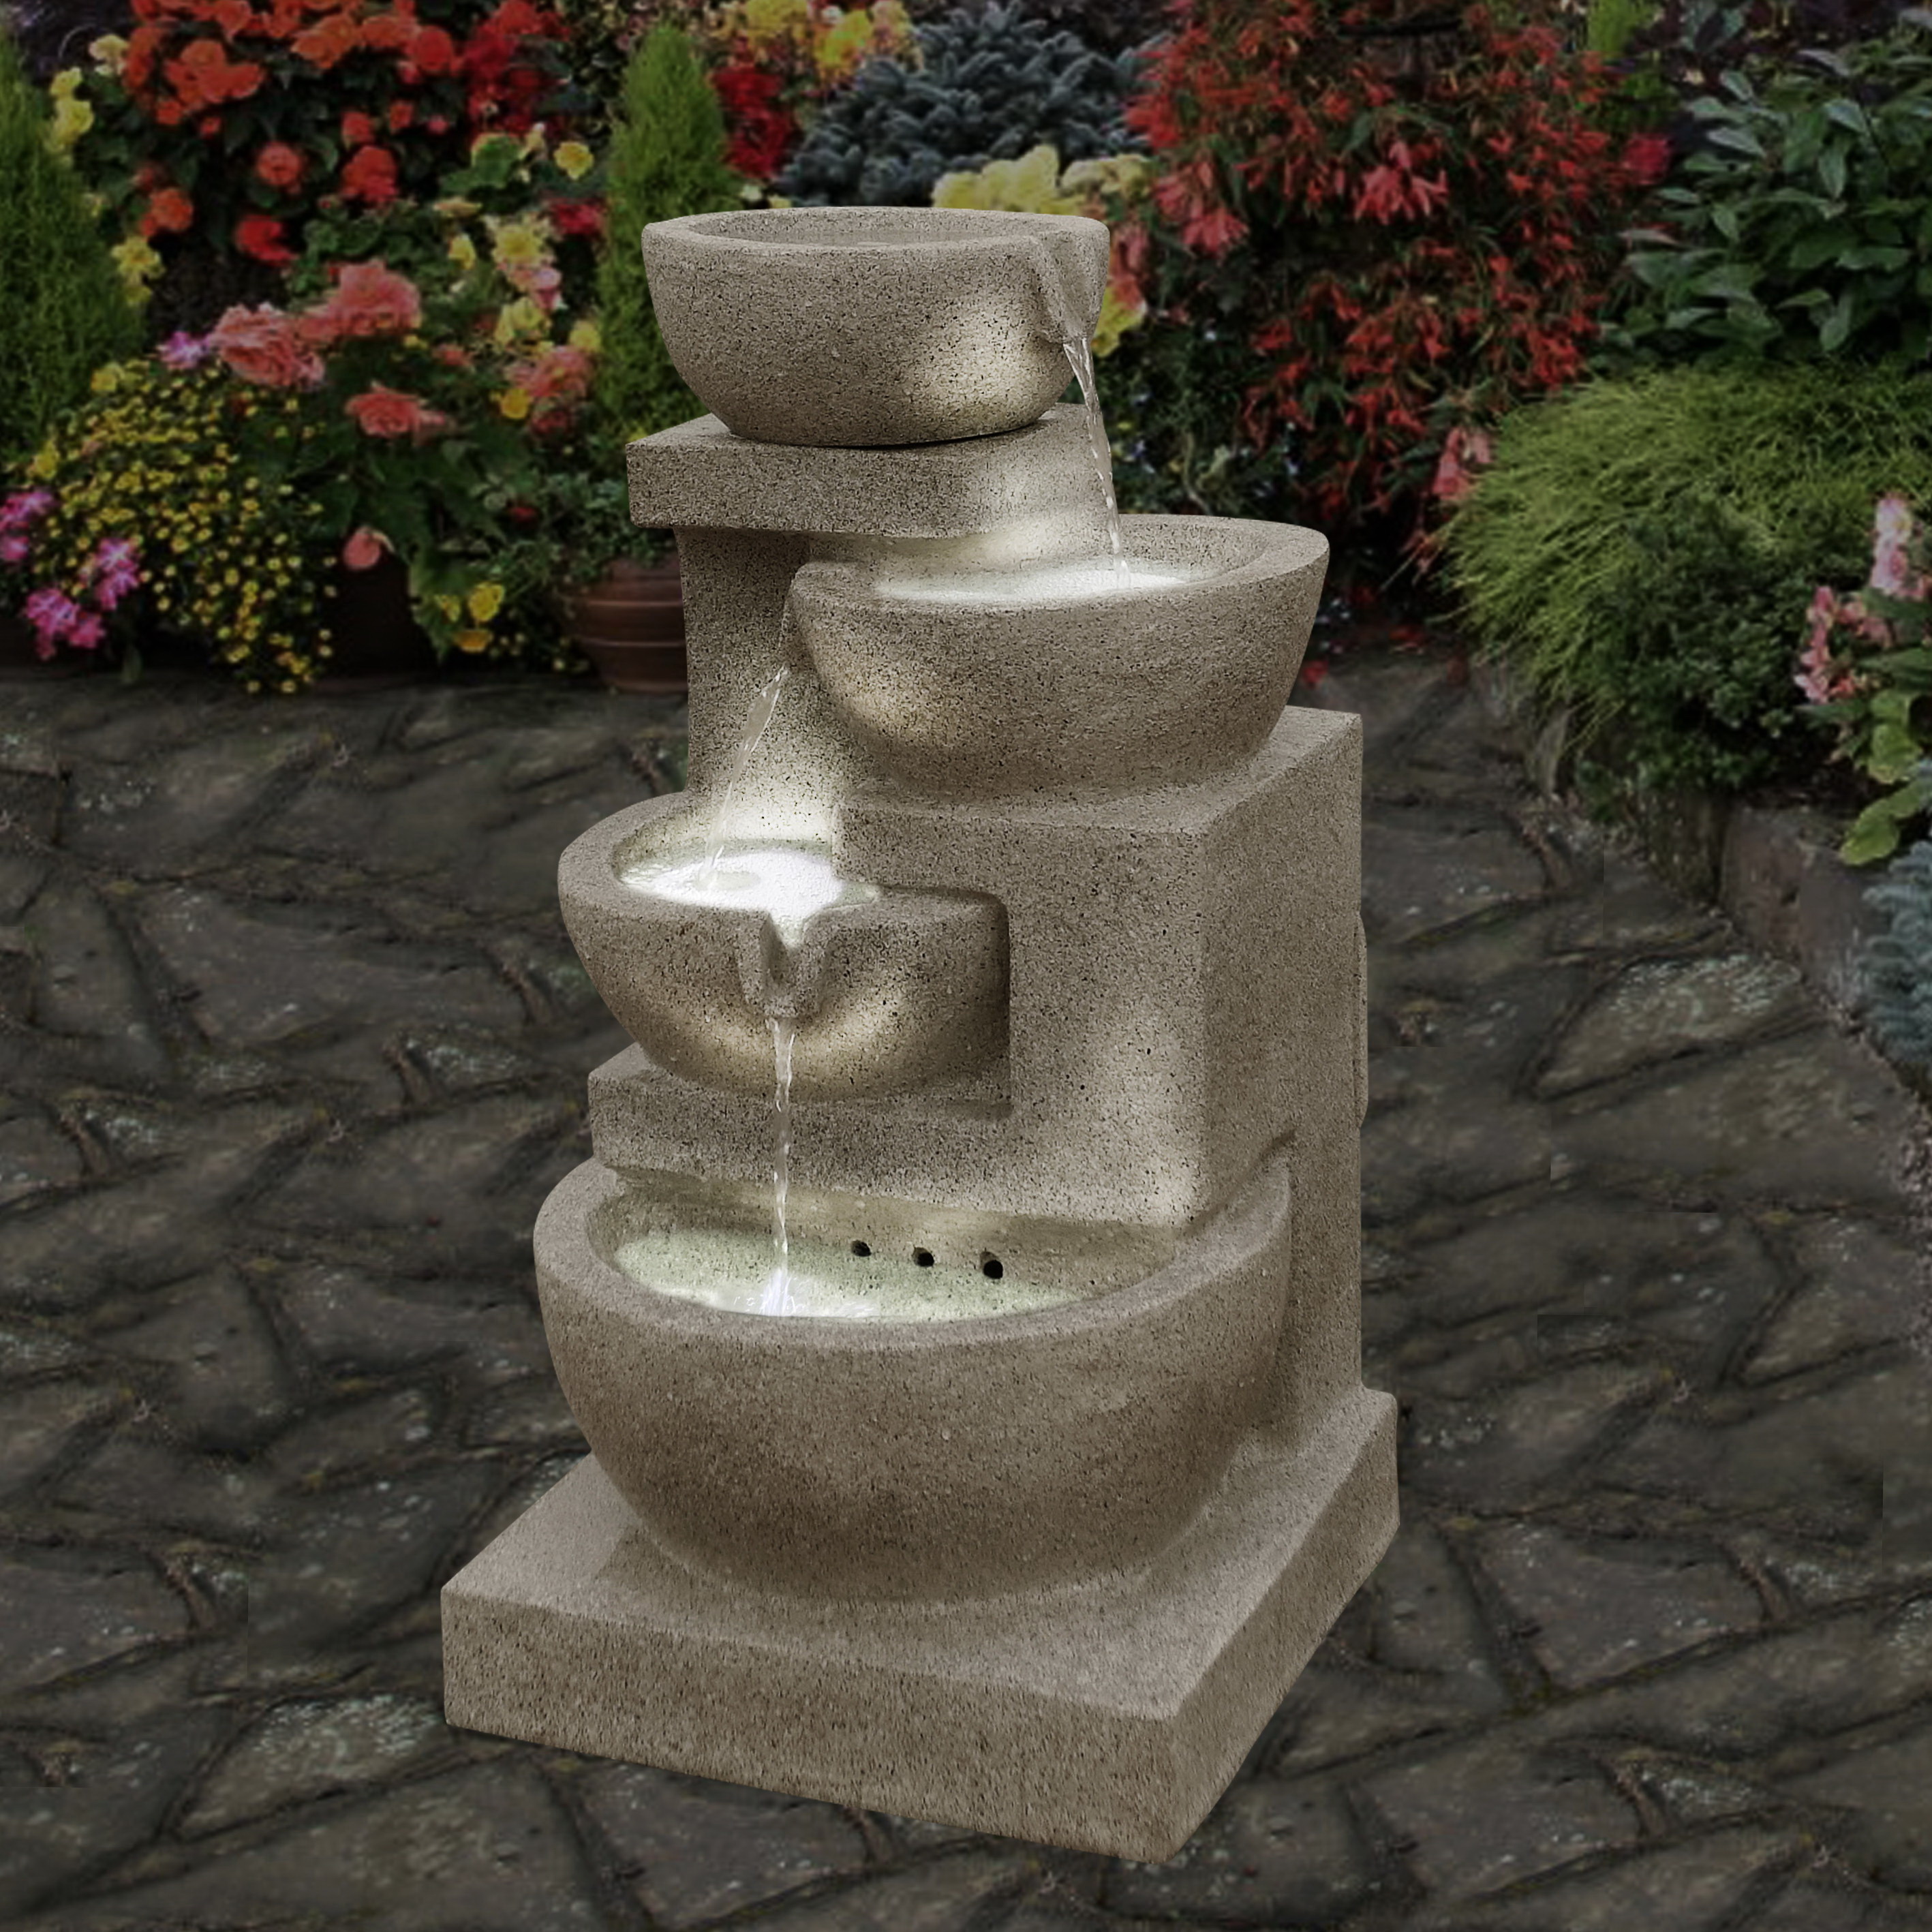 AMPLE 4 tiers solar resin fountain dancing water video